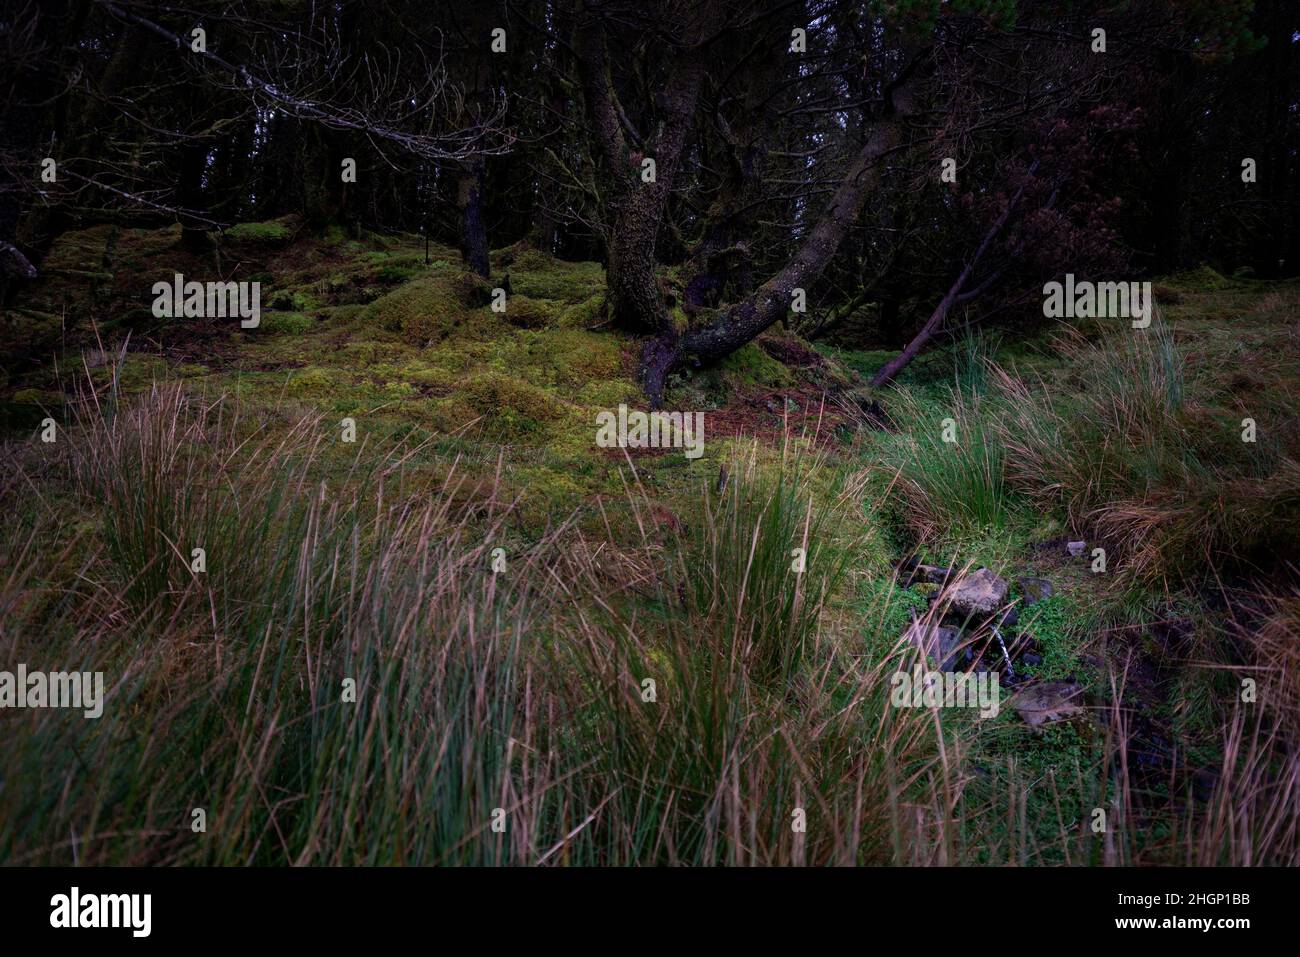 A dark forest in Ireland, the wet soil  is covered with green moss. A small well rises at the bottom right Stock Photo